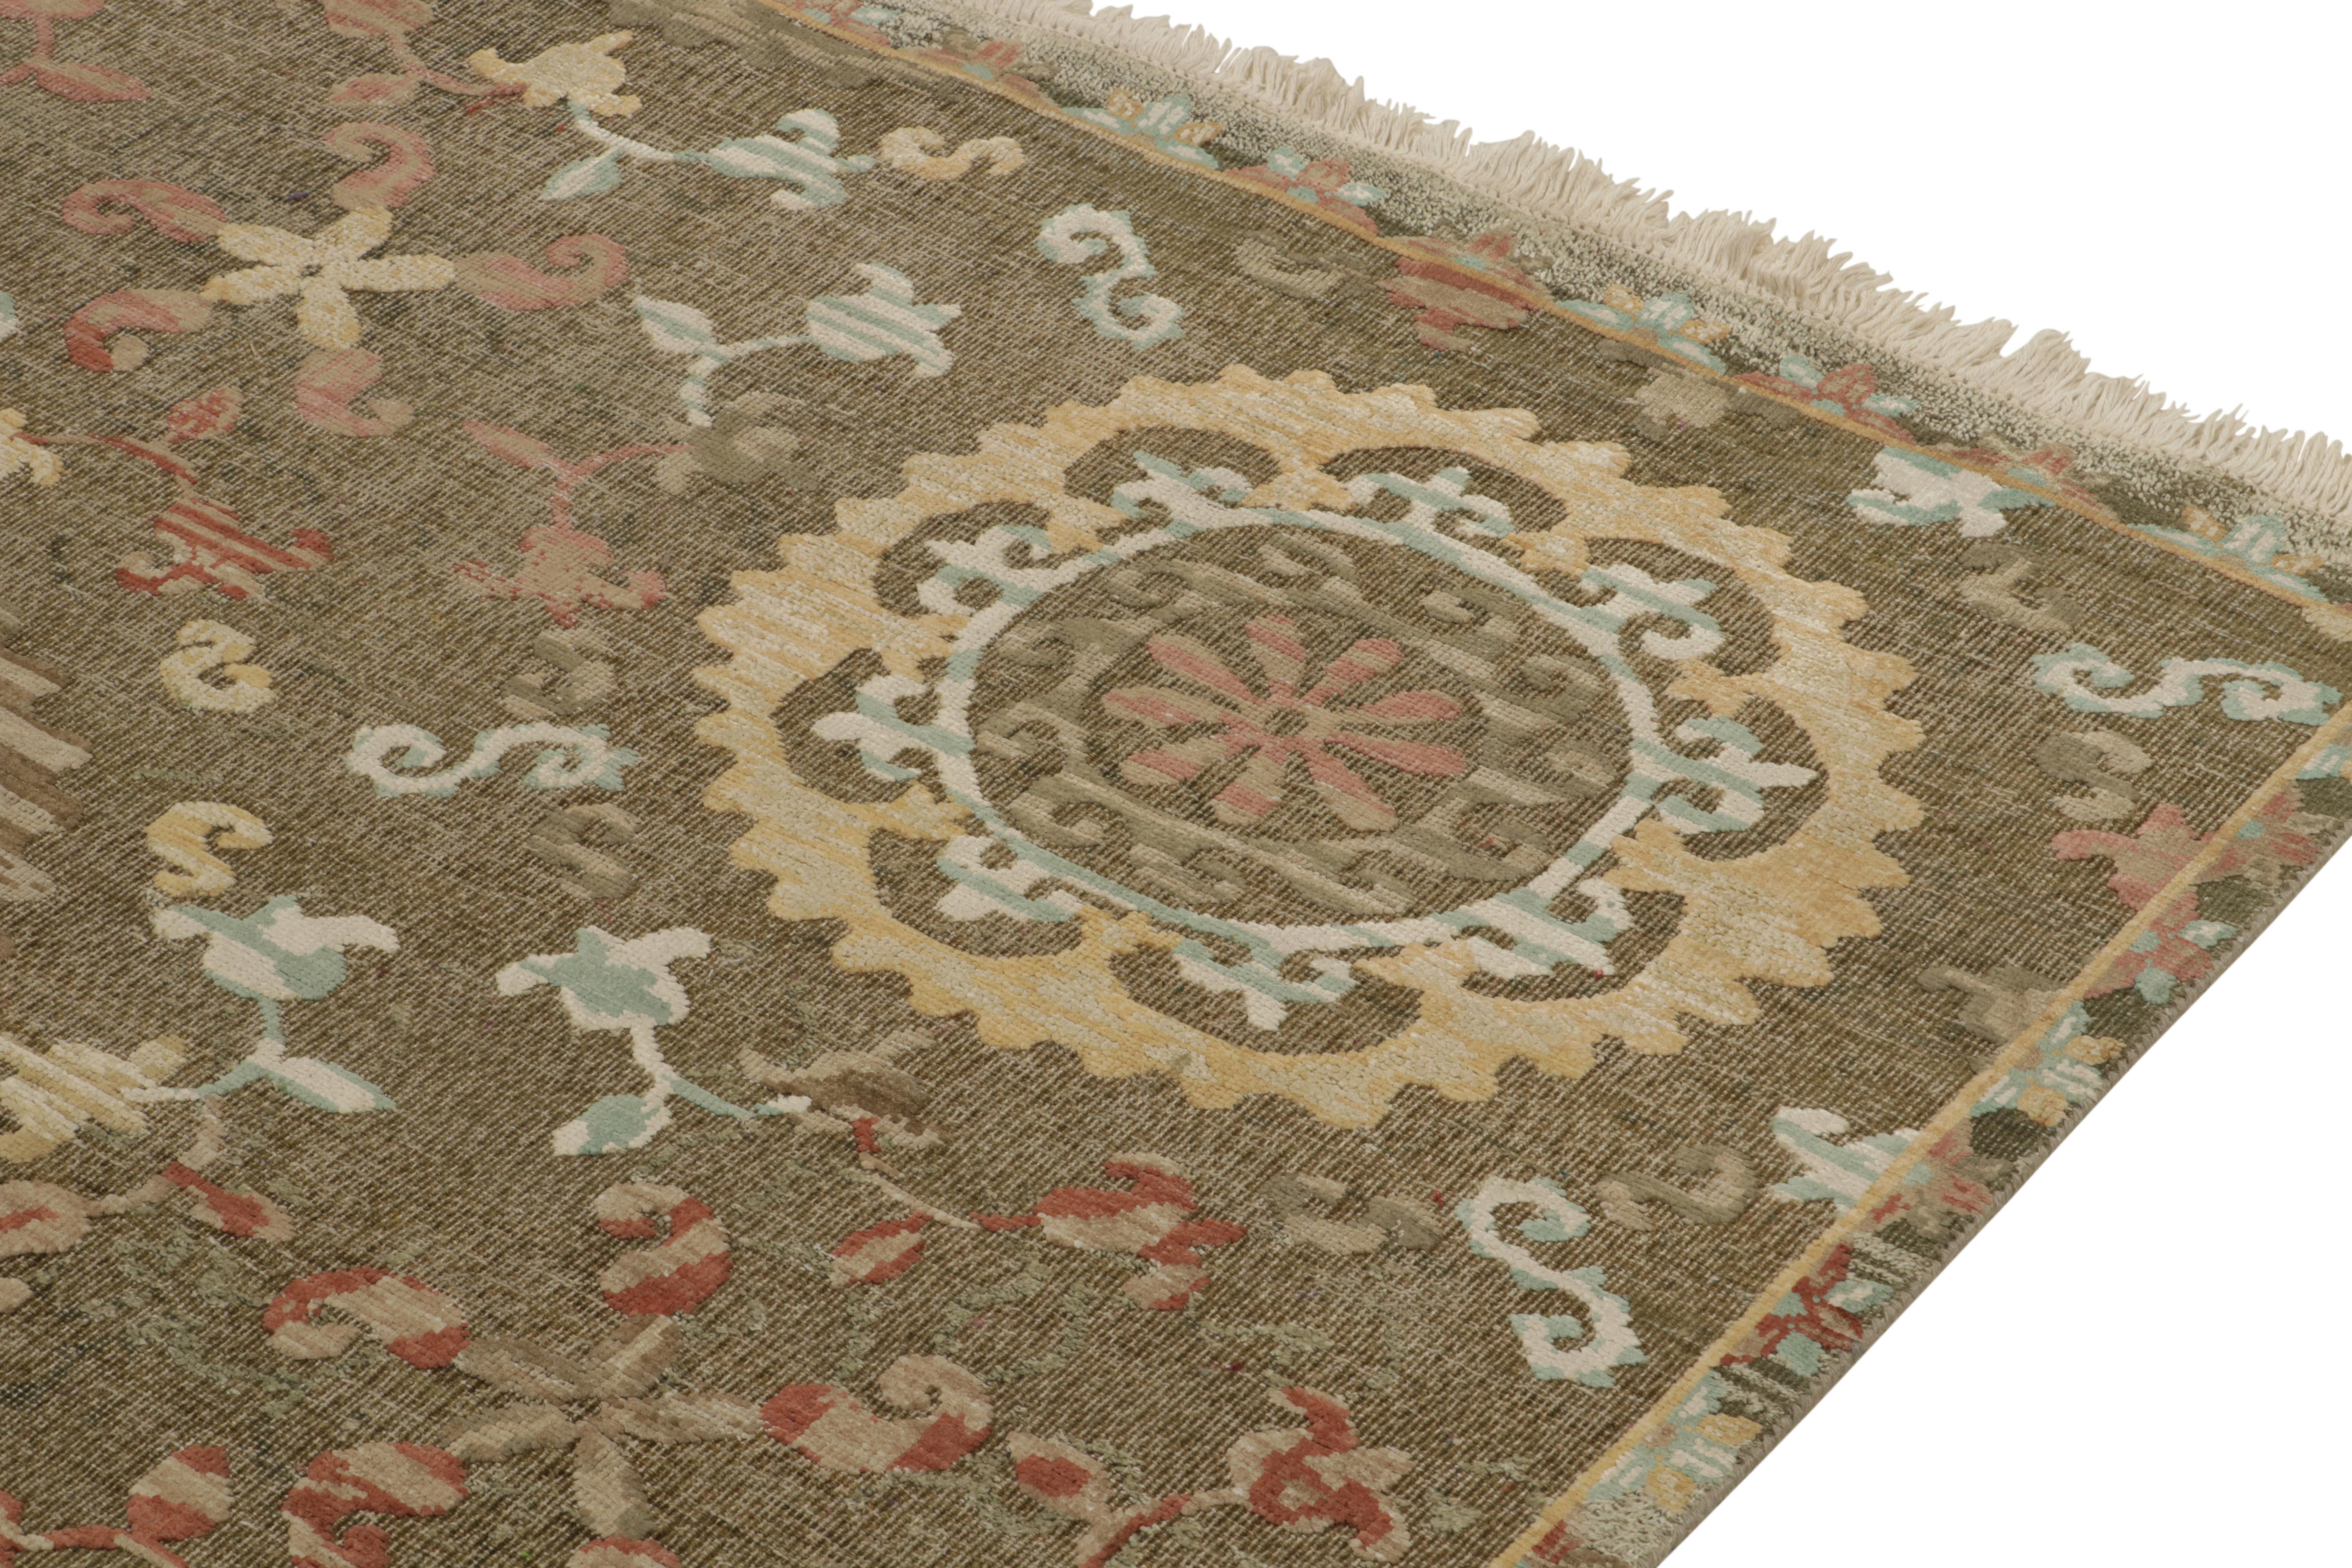 Indian Rug & Kilim’s Classic Spanish Style Rug in Beige-Brown, Gold & Blue Medallions For Sale